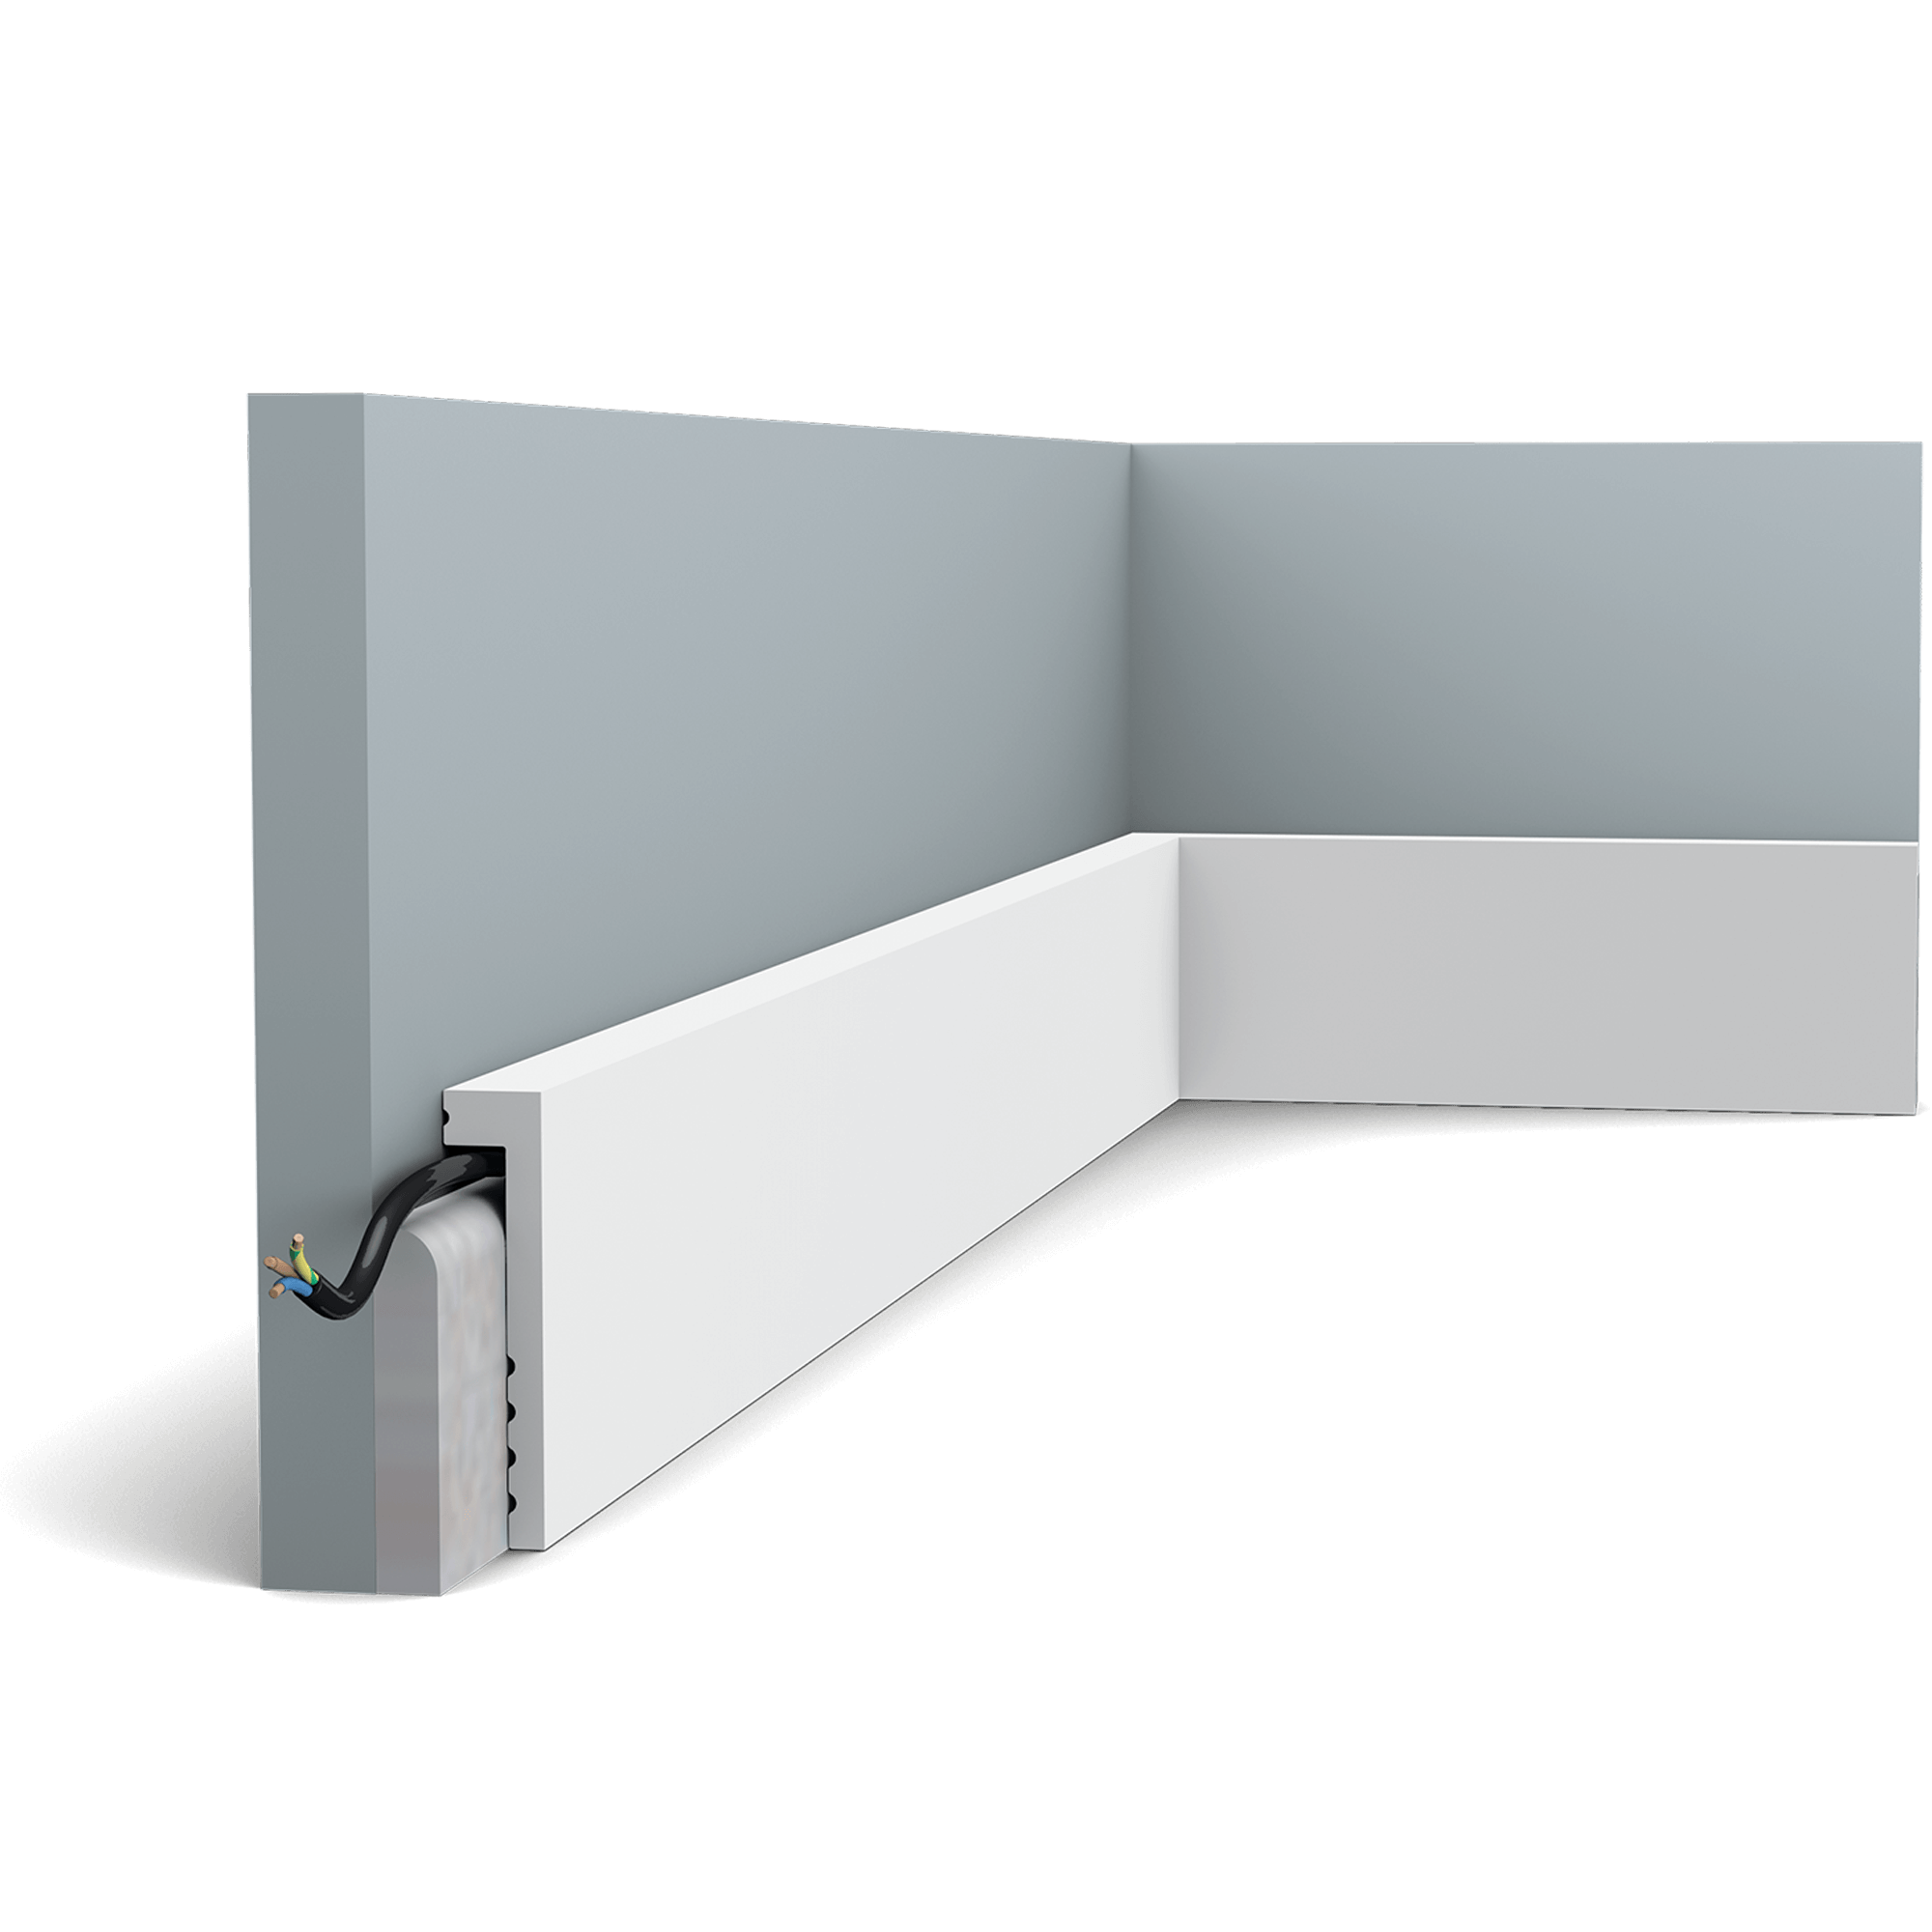 This water-resistant and paintable cover skirting is ideal for renovations. Designed to be installed on top of existing skirting boards (1.4 x 8.8 cm max.). Old or damaged skirting boards that are difficult to remove are obstacles no more.